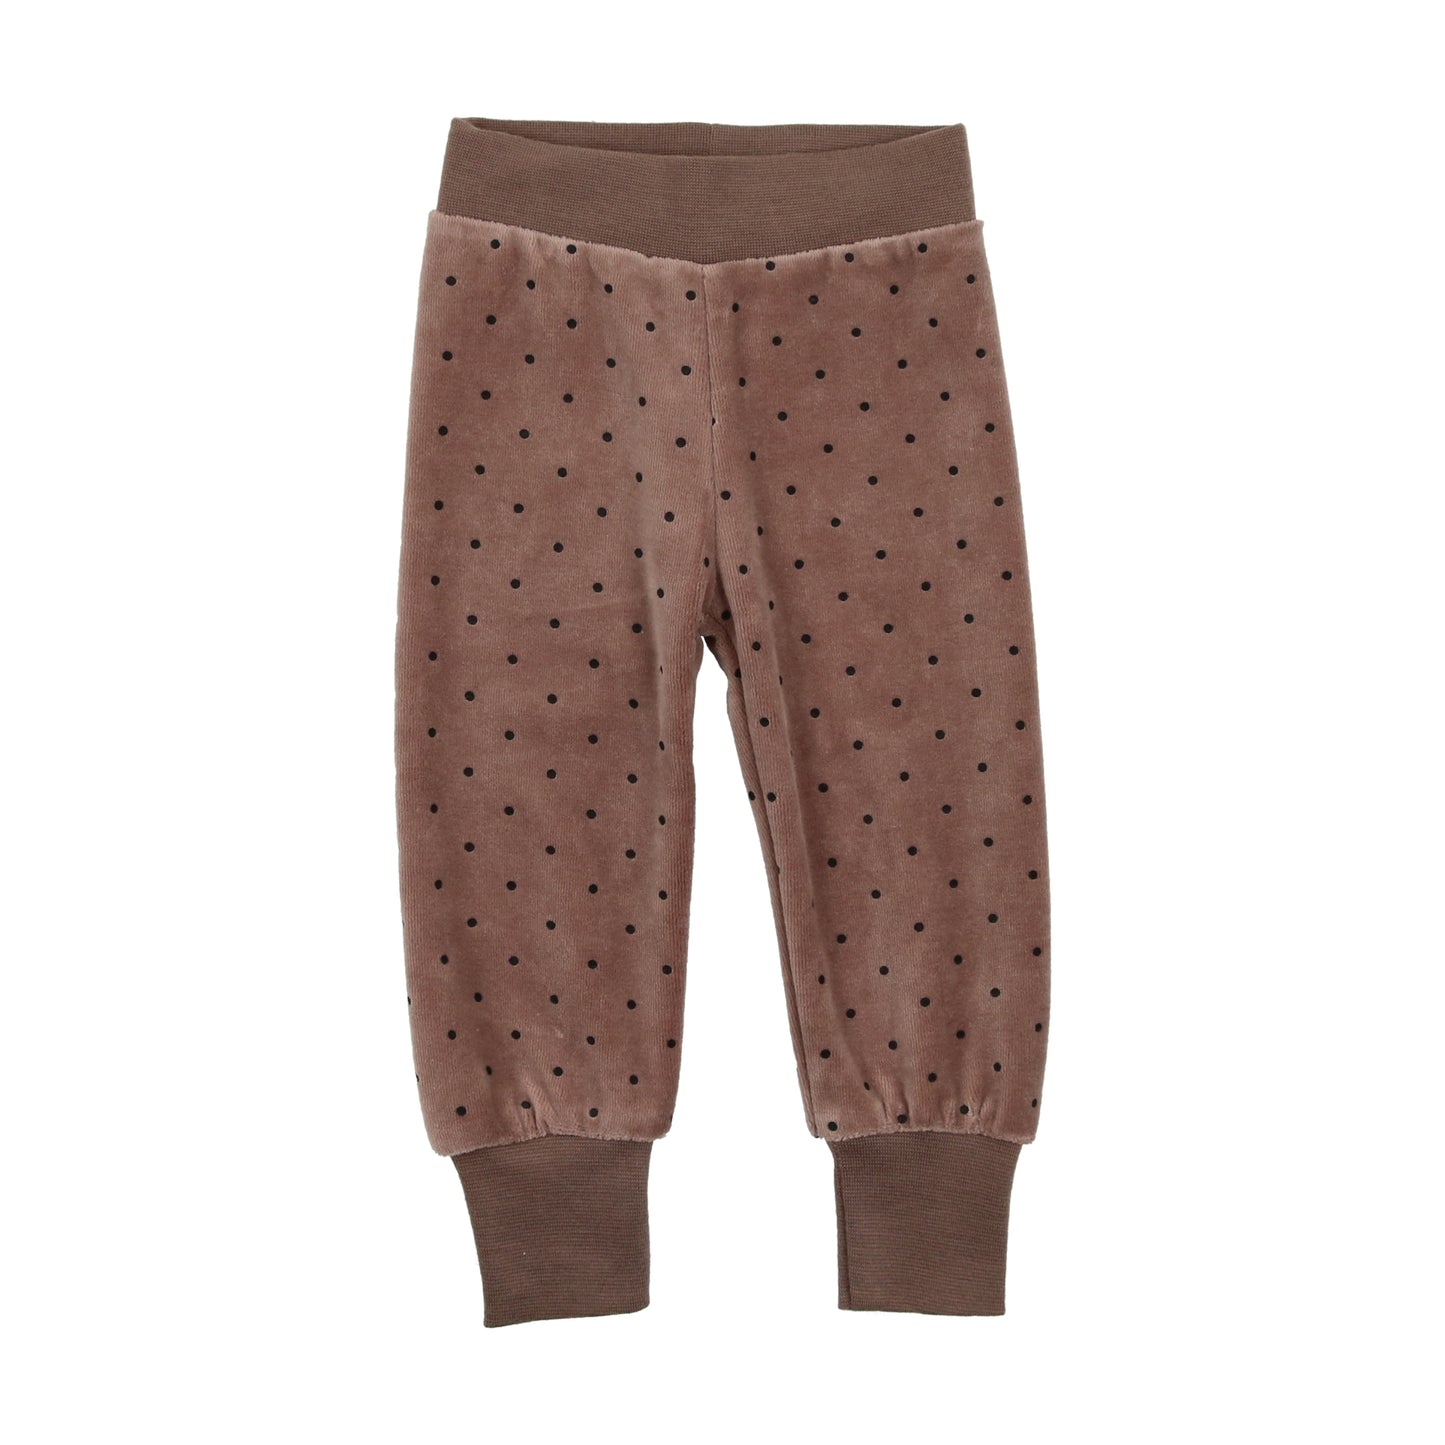 Analogie Taupe Dotted Velour Sweatpants [Final Sale]